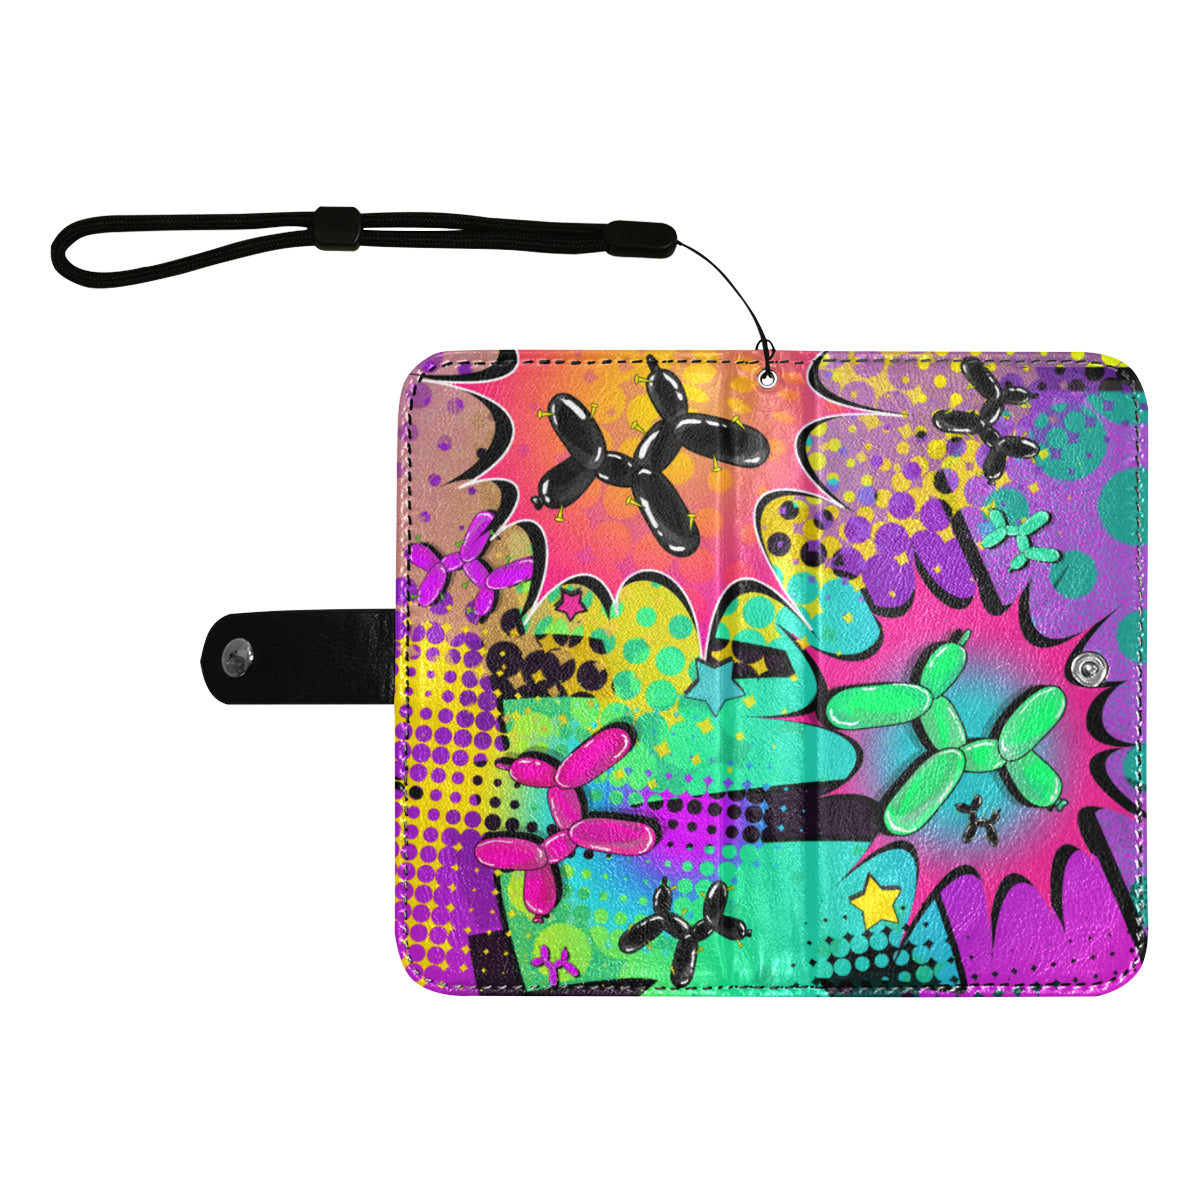 Psychedelic - 2 in 1 Phone Case and Wallet - LARGE